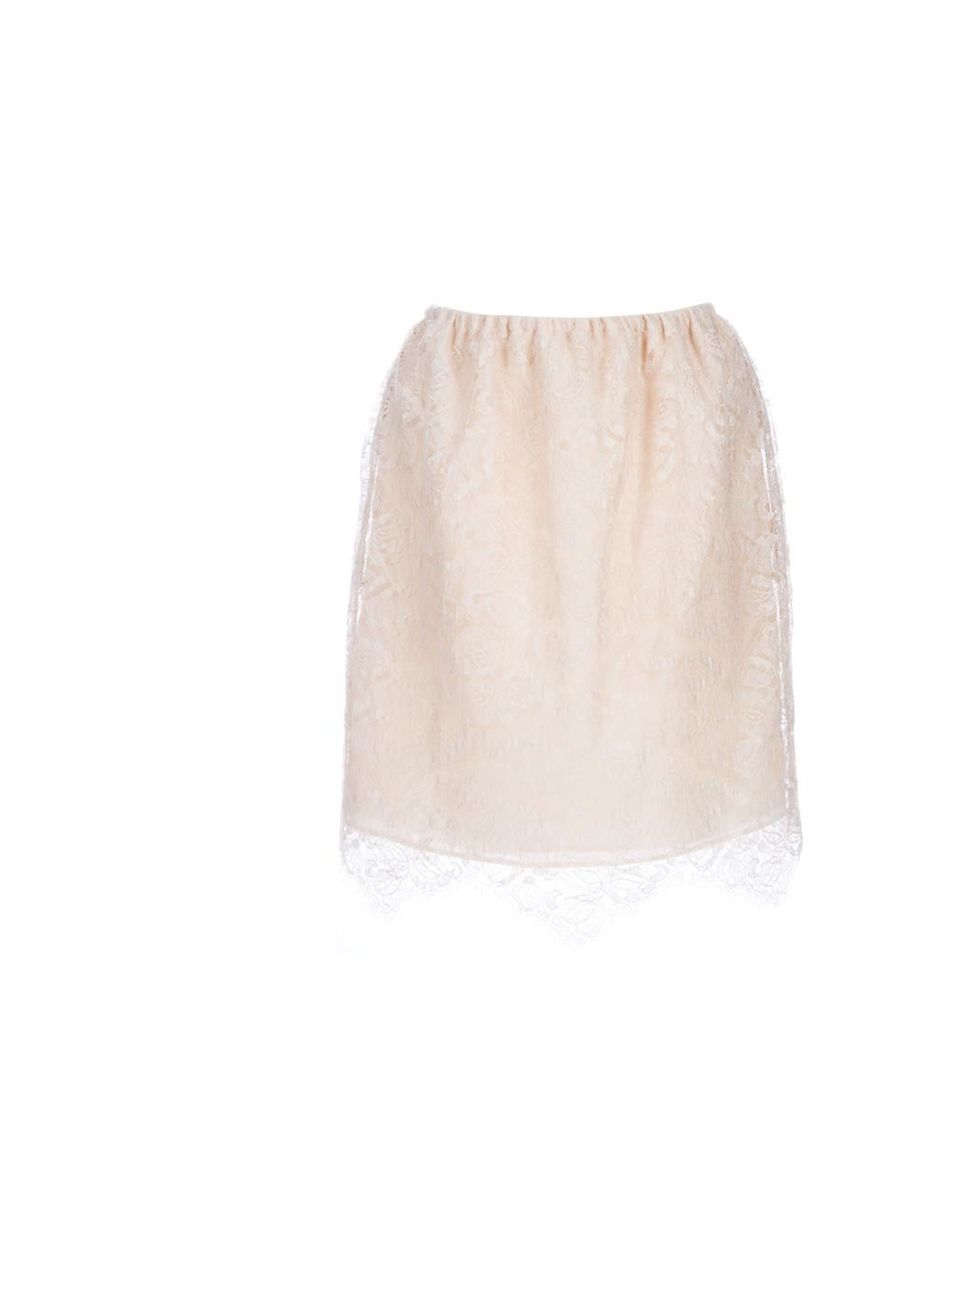 <p>Carven lace skirt, £355, at <a href="http://www.farfetch.com/shopping/women/carven-lace-skirt-item-10158551.aspx">Farfetch</a></p>